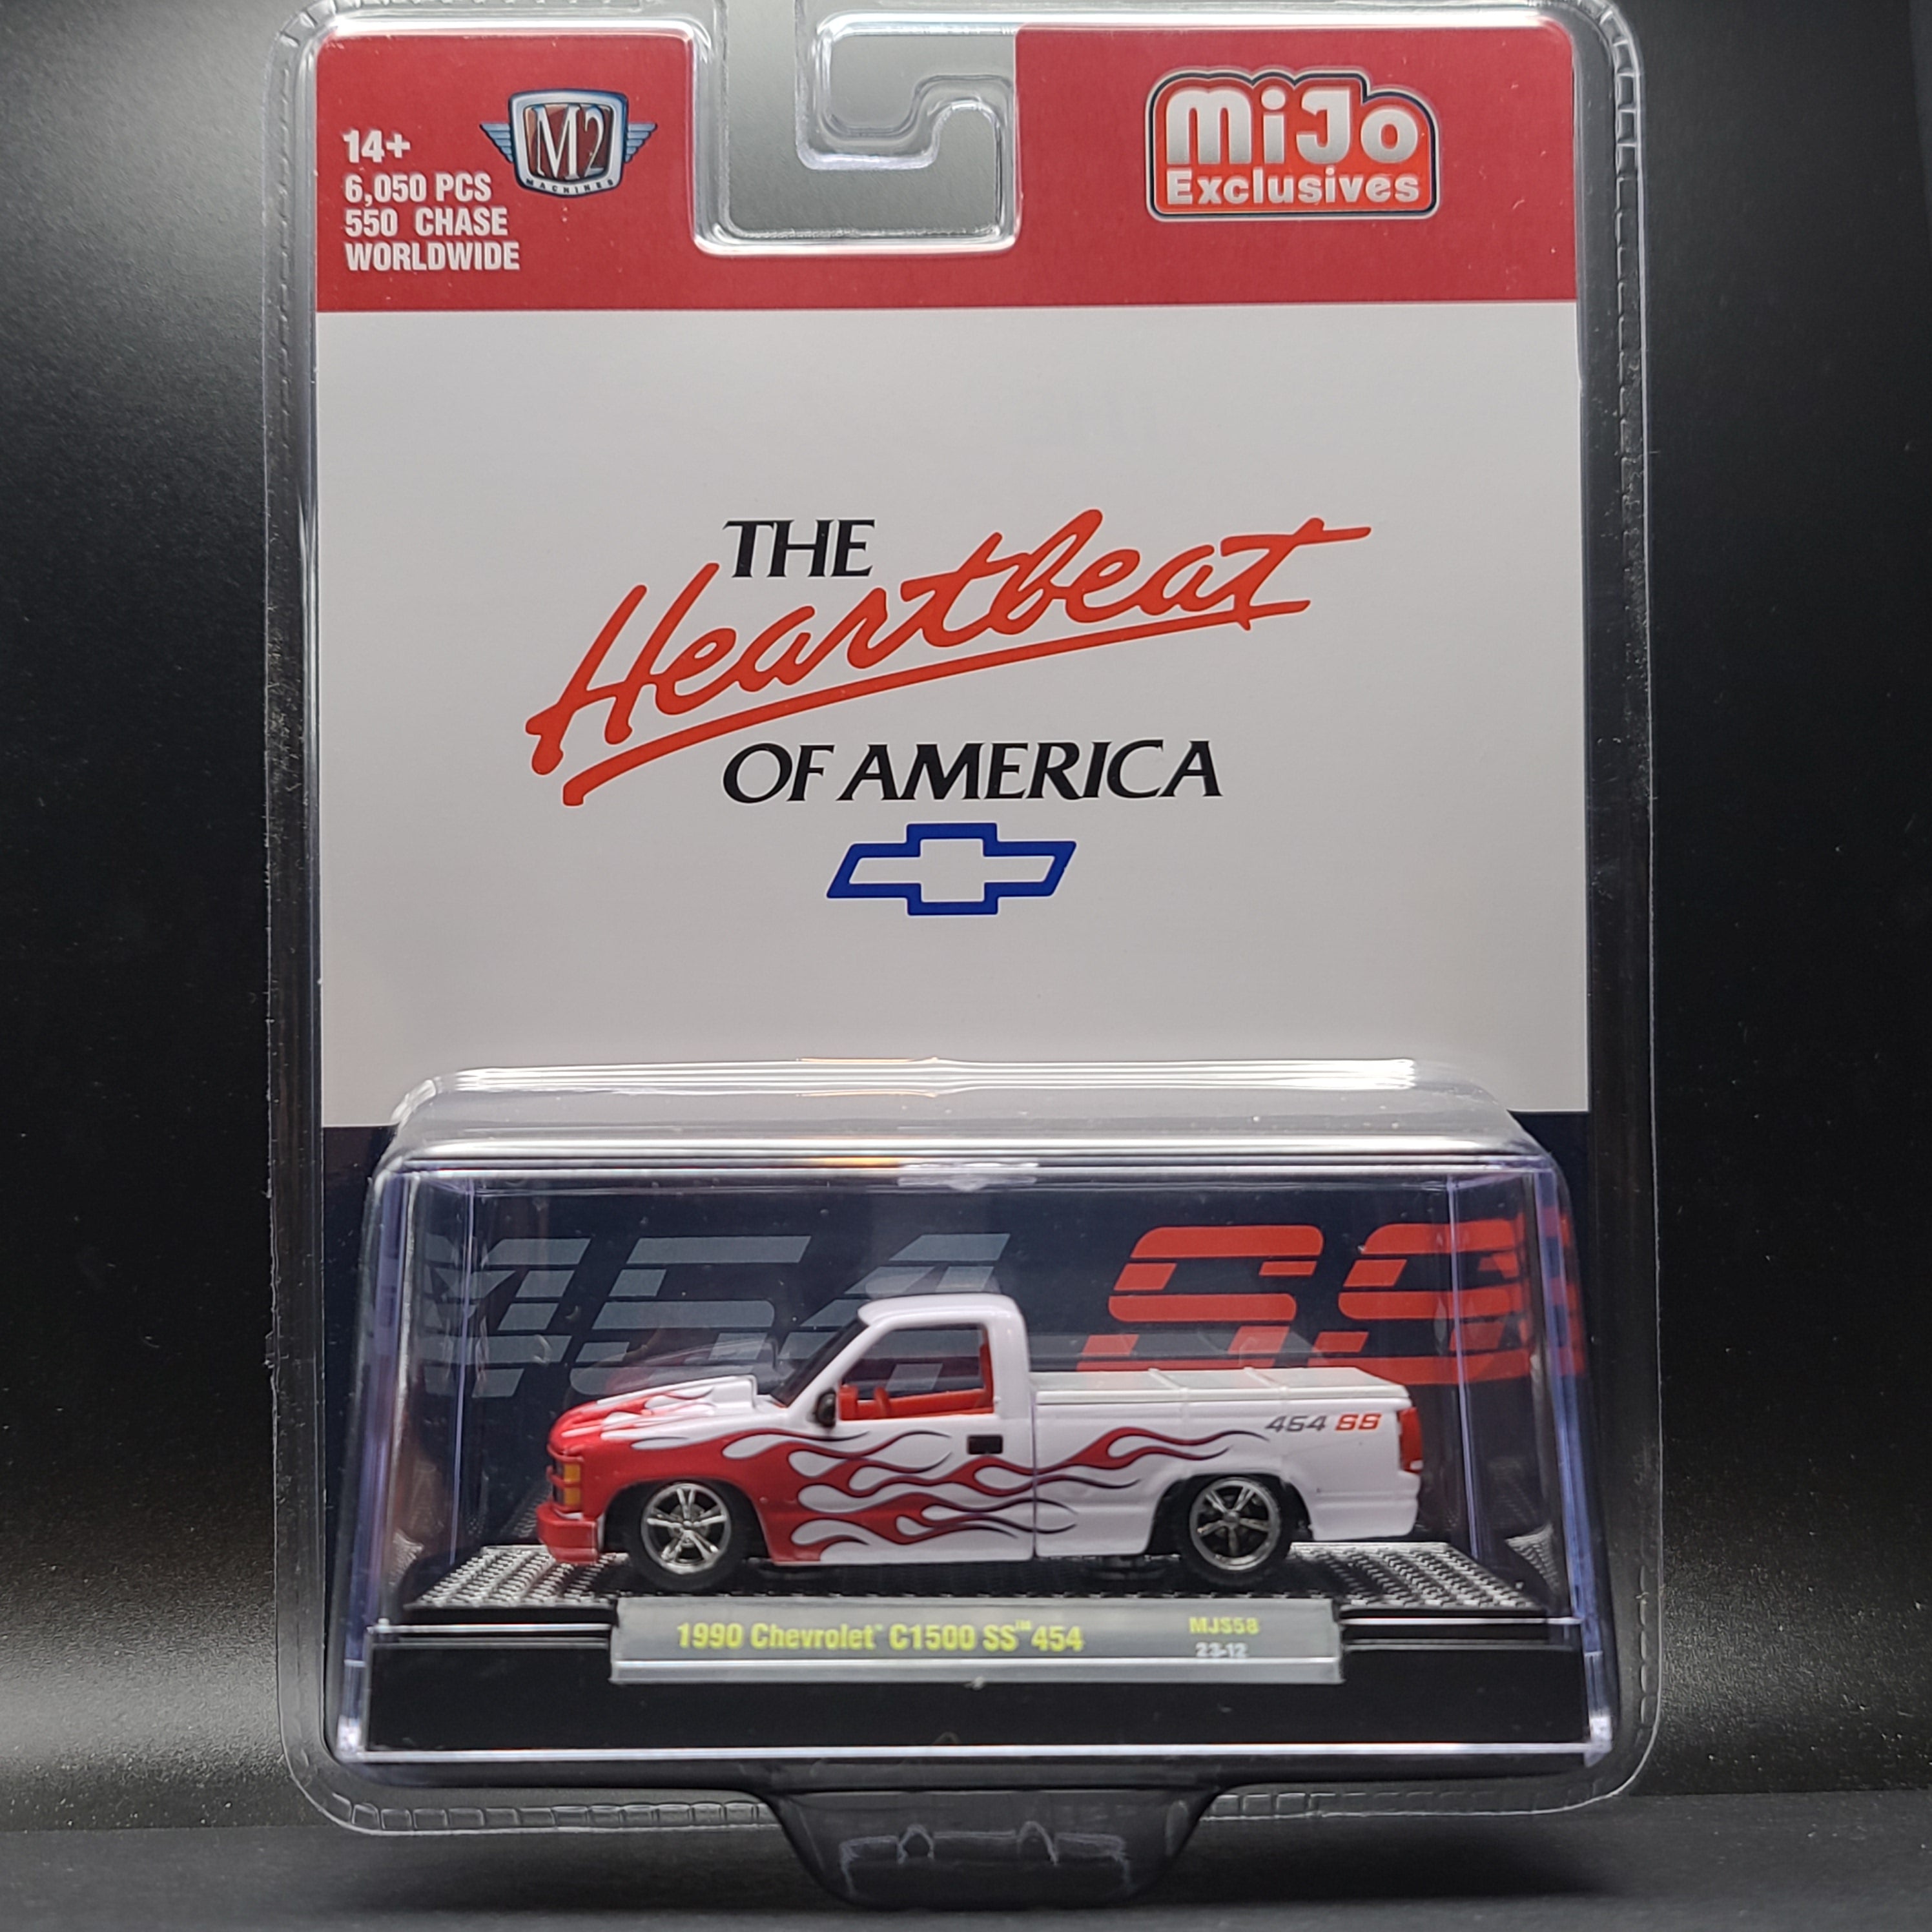 M2 Machines '90 Chevrolet C1500 SS 454 Pick-up Truck, White w/ Red Flames (2023 MiJo Exclusives - Limited Edition)